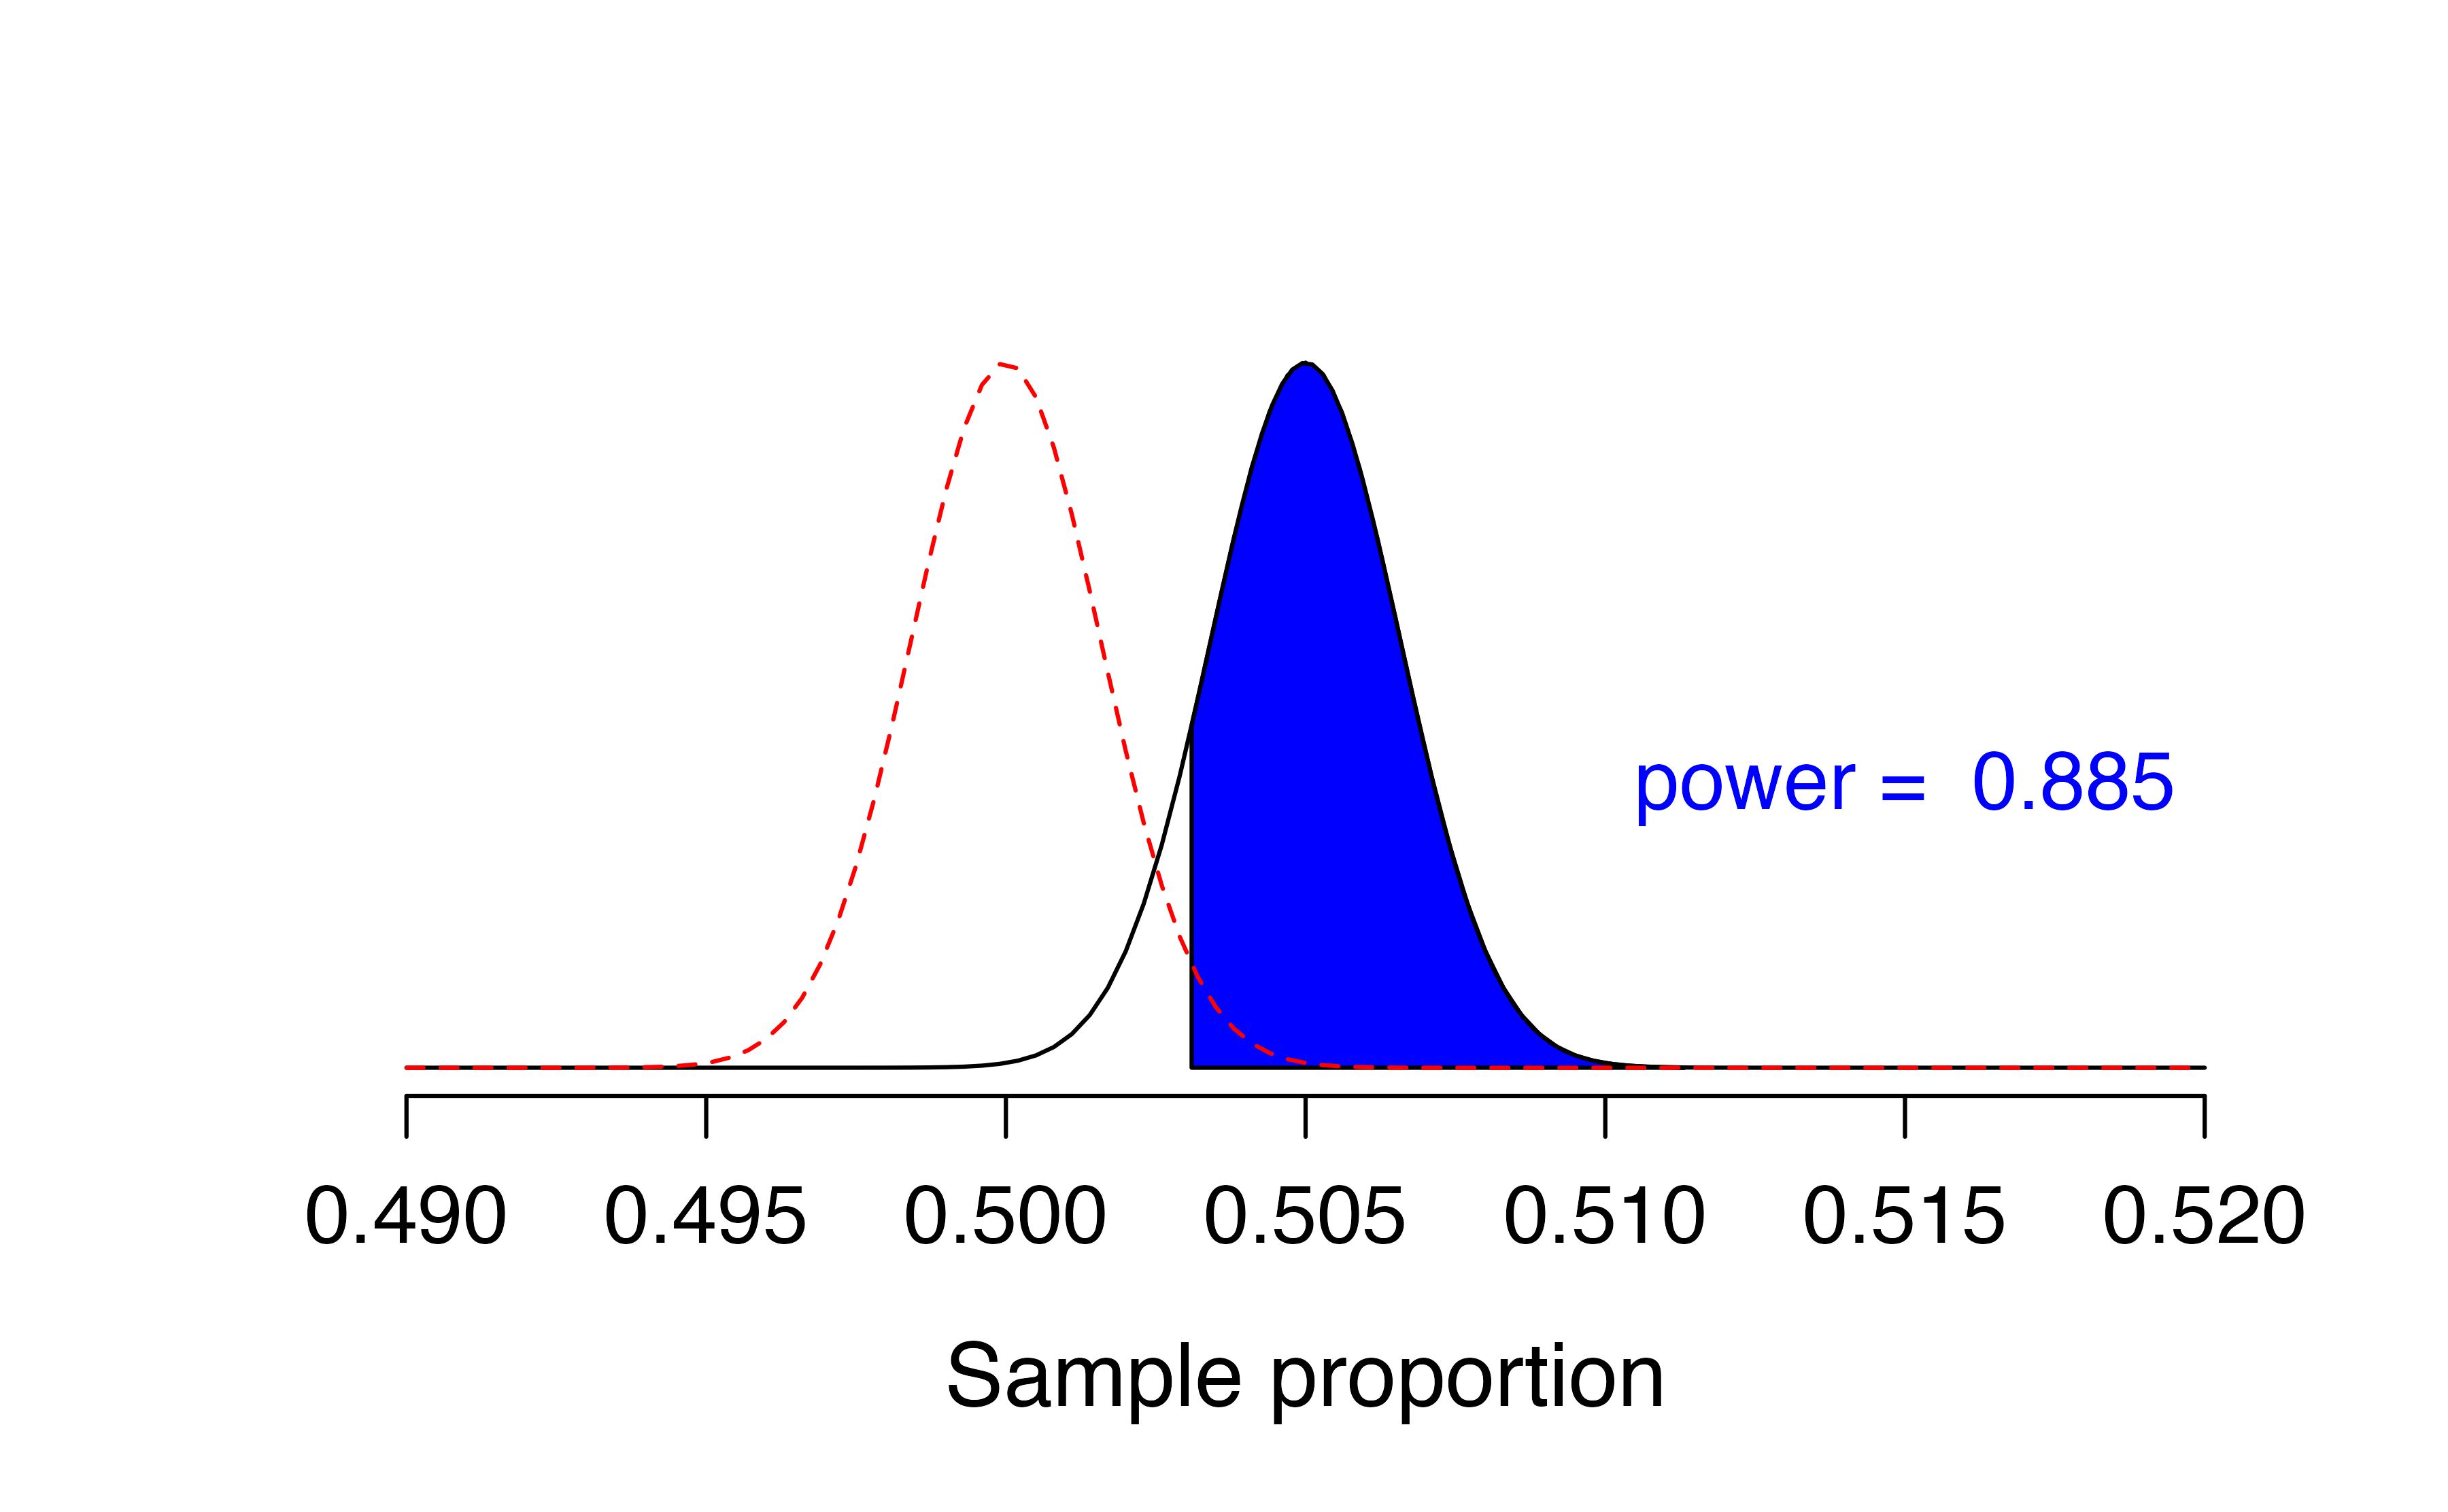 Black curve: sampling distribution of sample proportions from samples of size 100,000 when the true proportion is 0.505. Red curve: null distribution of sample proportions for a null value of 0.50.